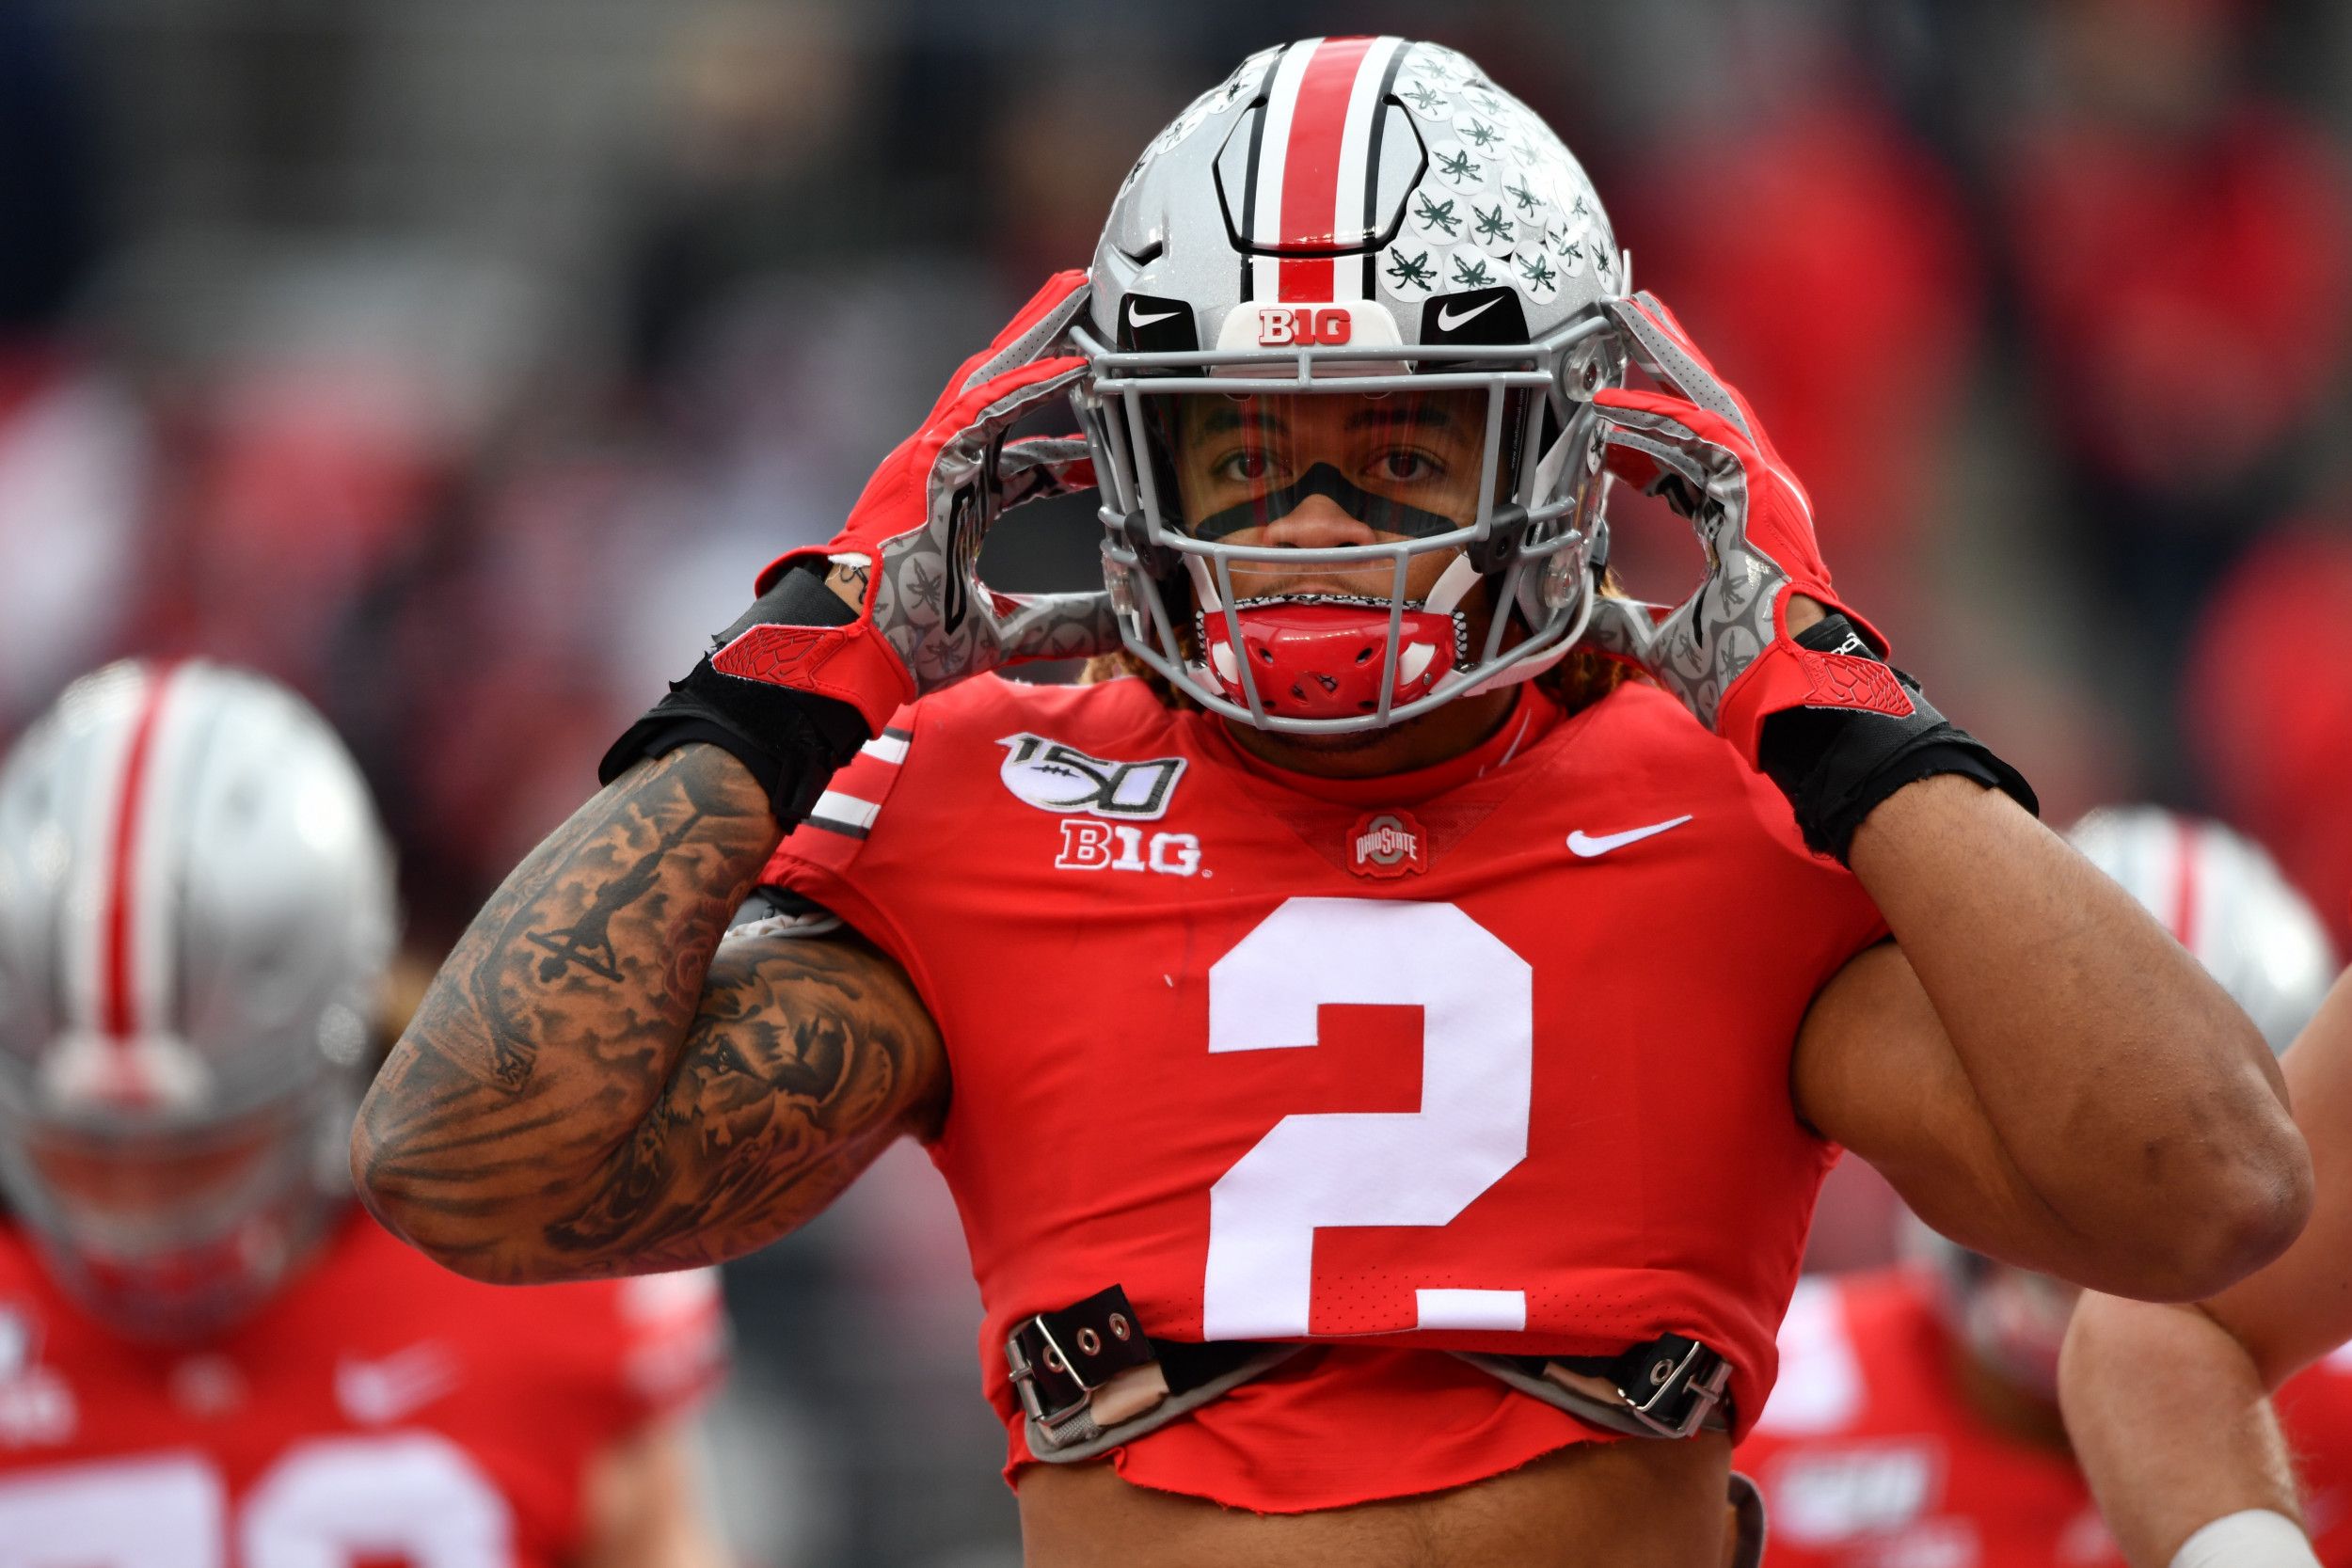 NFL Draft Order 2020: Complete List of First Round Picks, Top